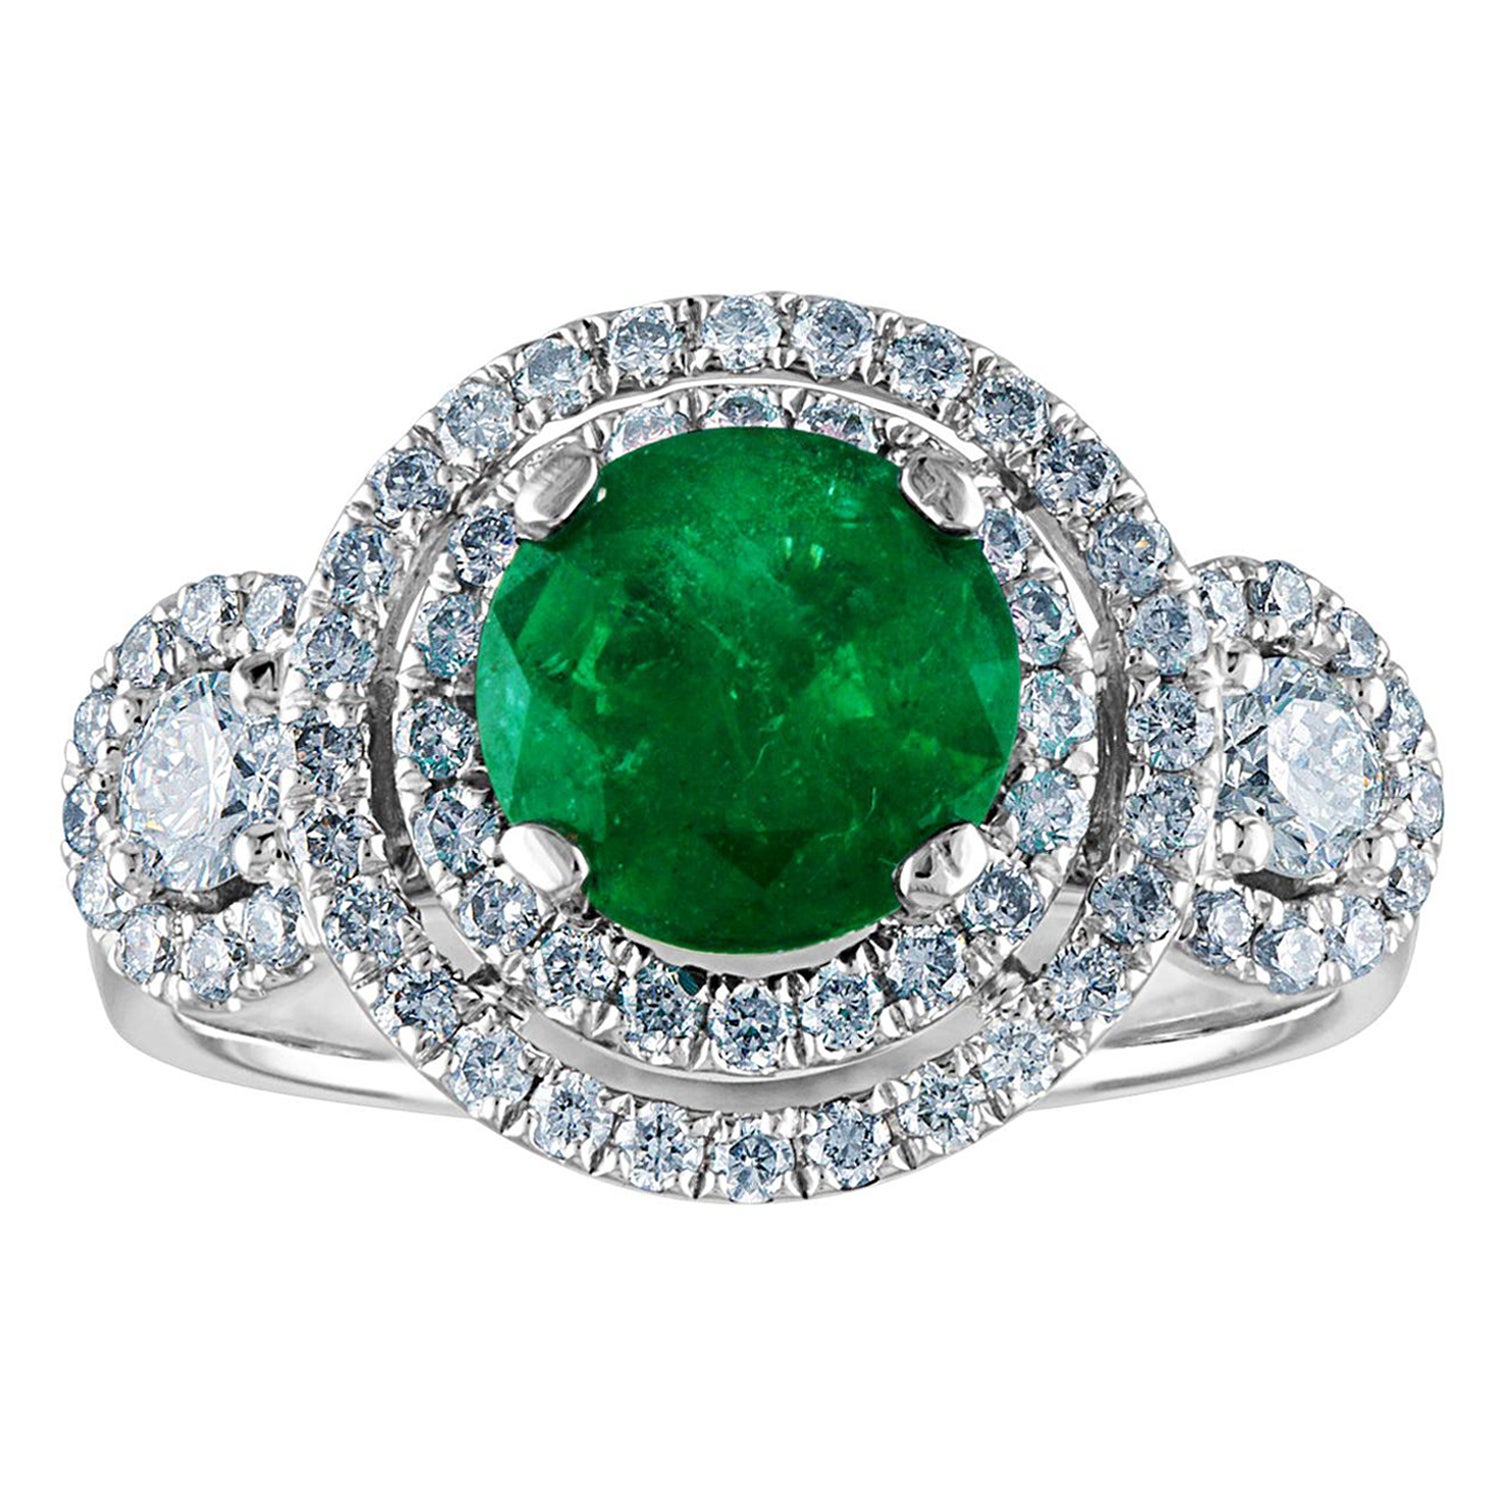 AGL Certified 1.51 Carat Round Emerald Diamond Gold Ring For Sale